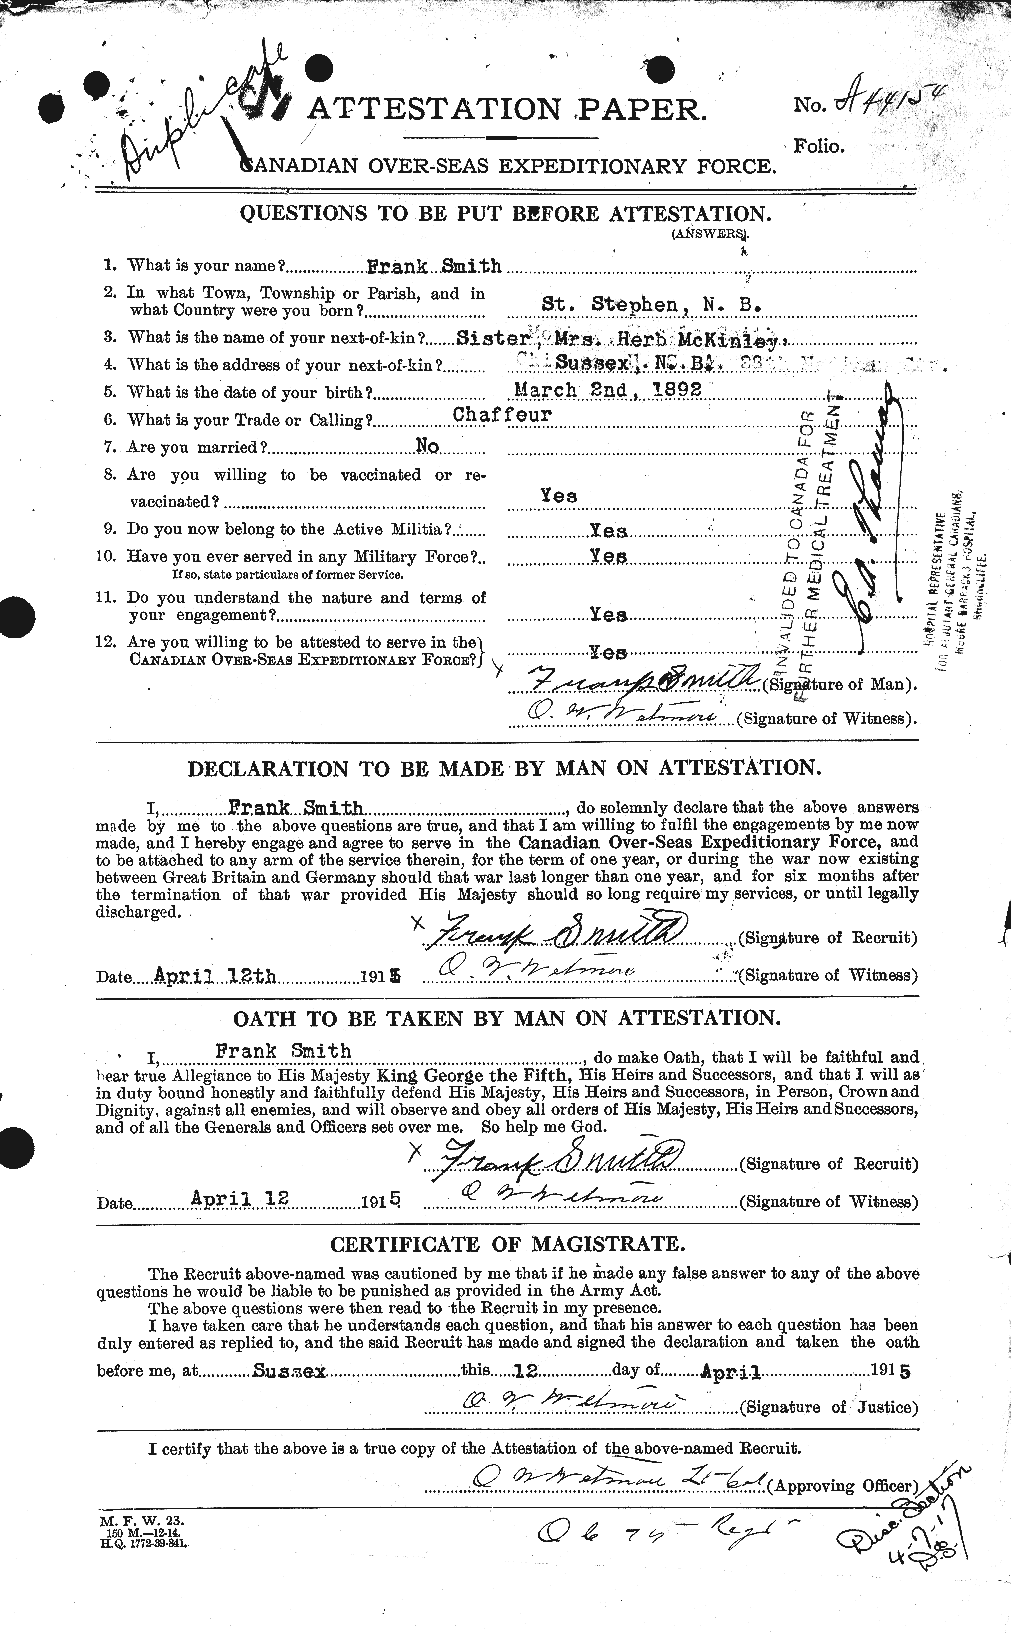 Personnel Records of the First World War - CEF 107023a